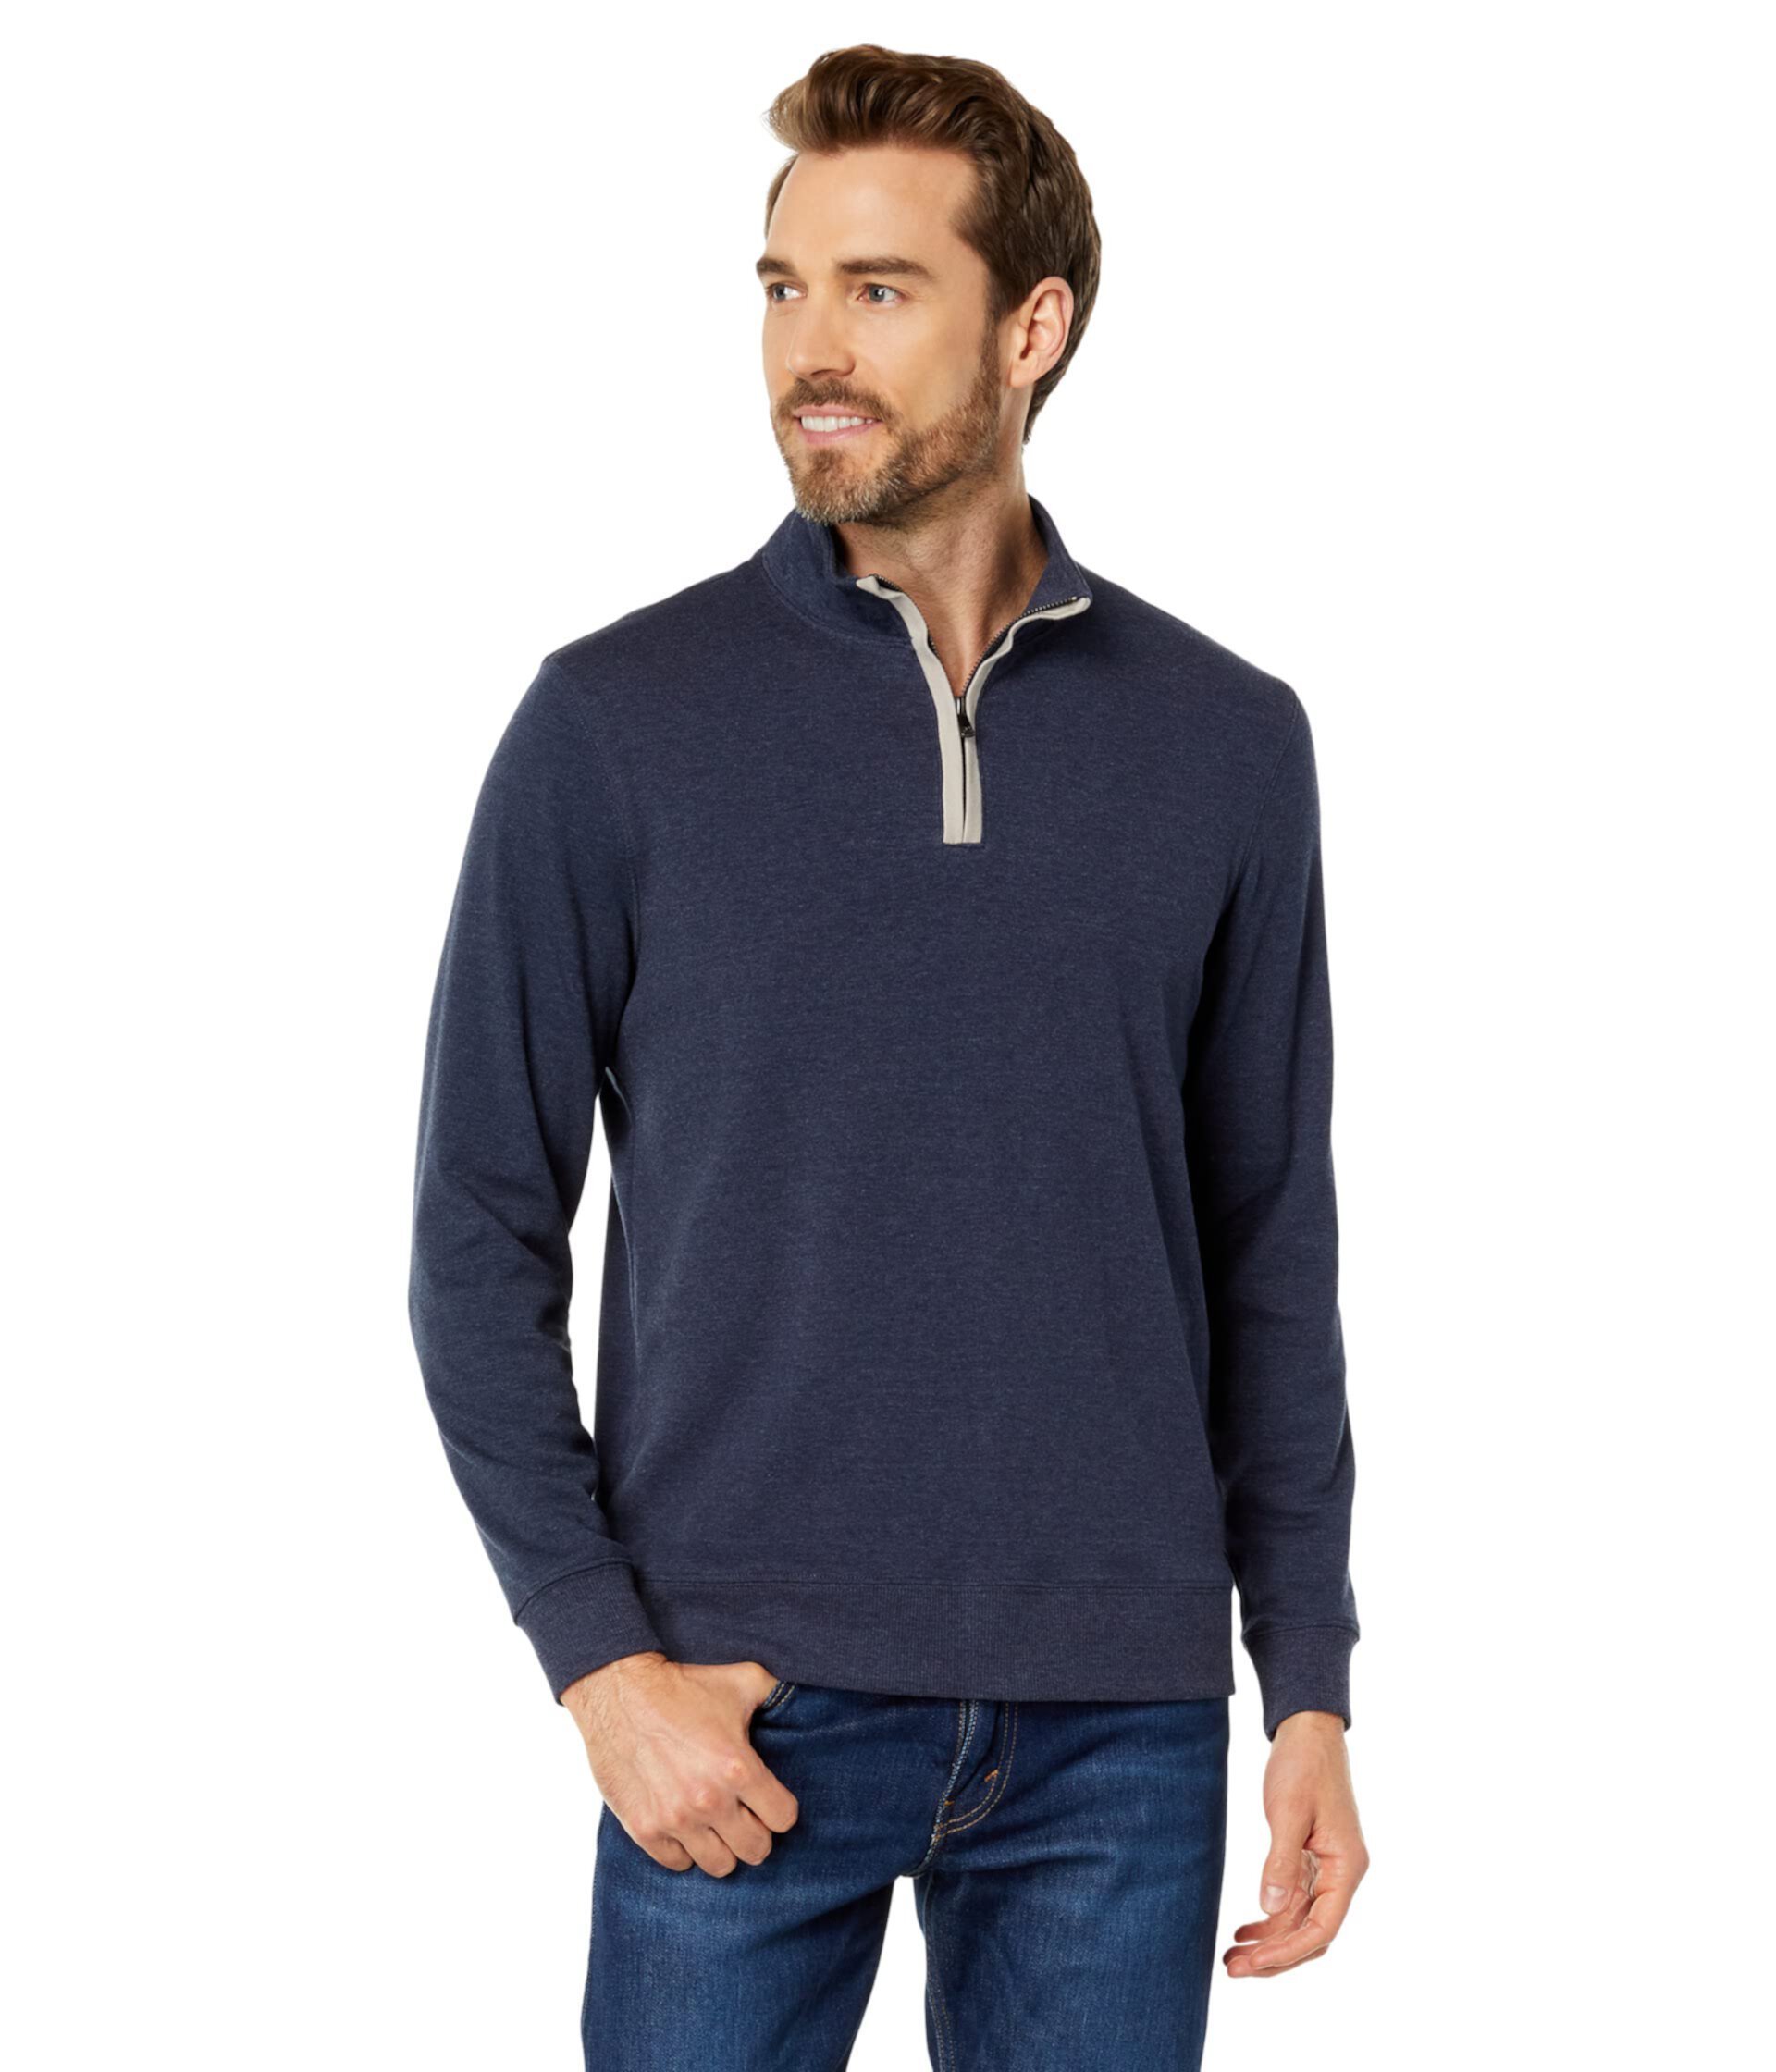 Puremeso Weekend 1/4 Zip THE NORMAL BRAND